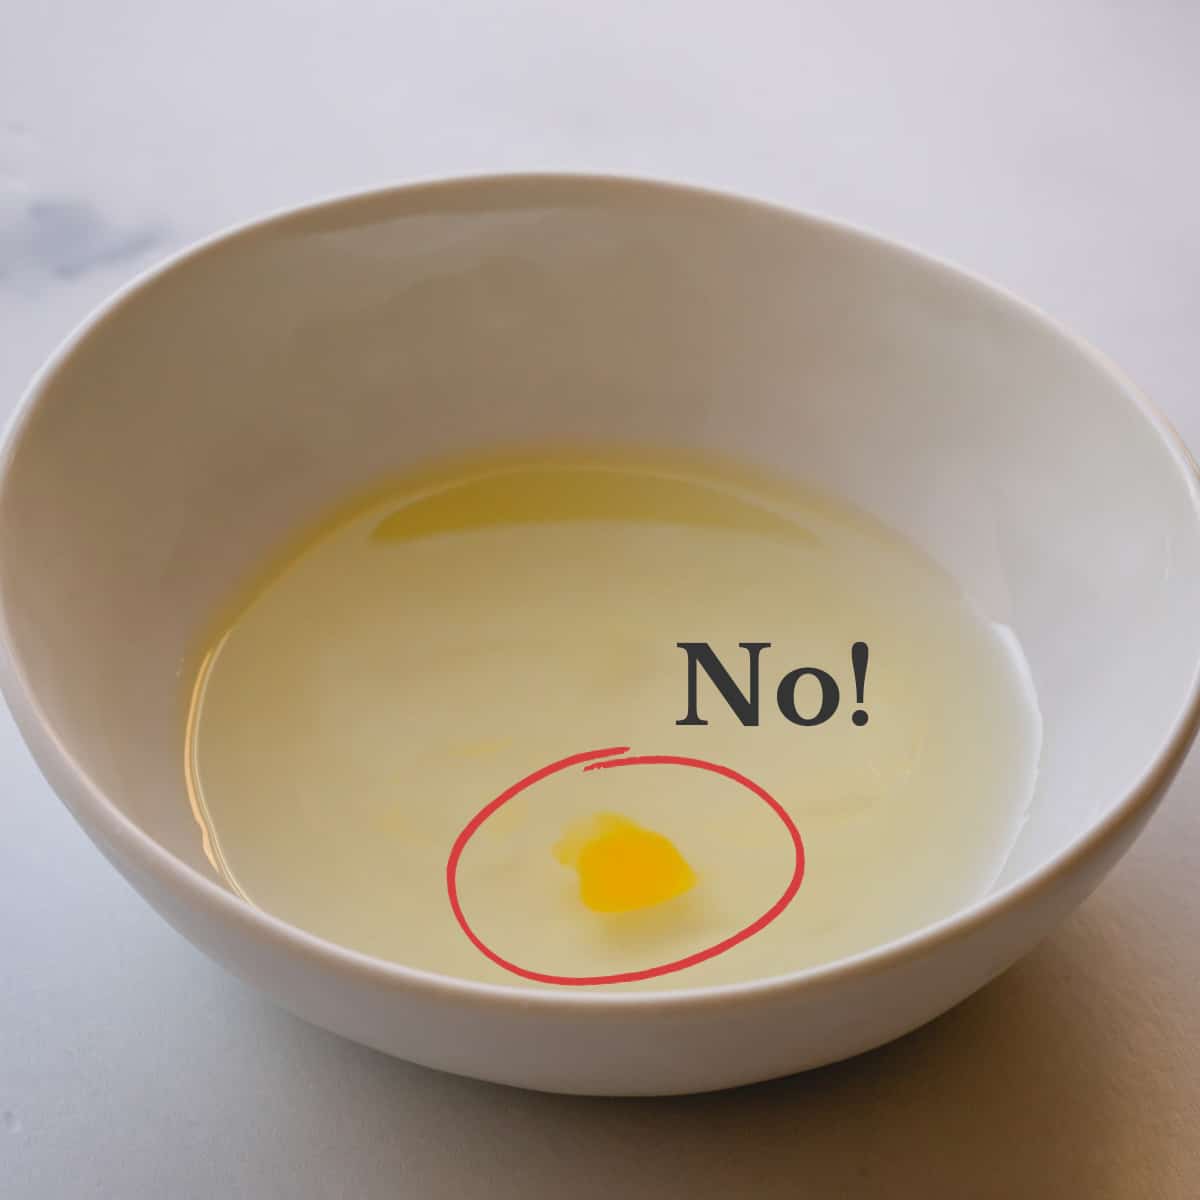 A bowl of egg whites with a small drop of egg yolk and a text says "NO!"